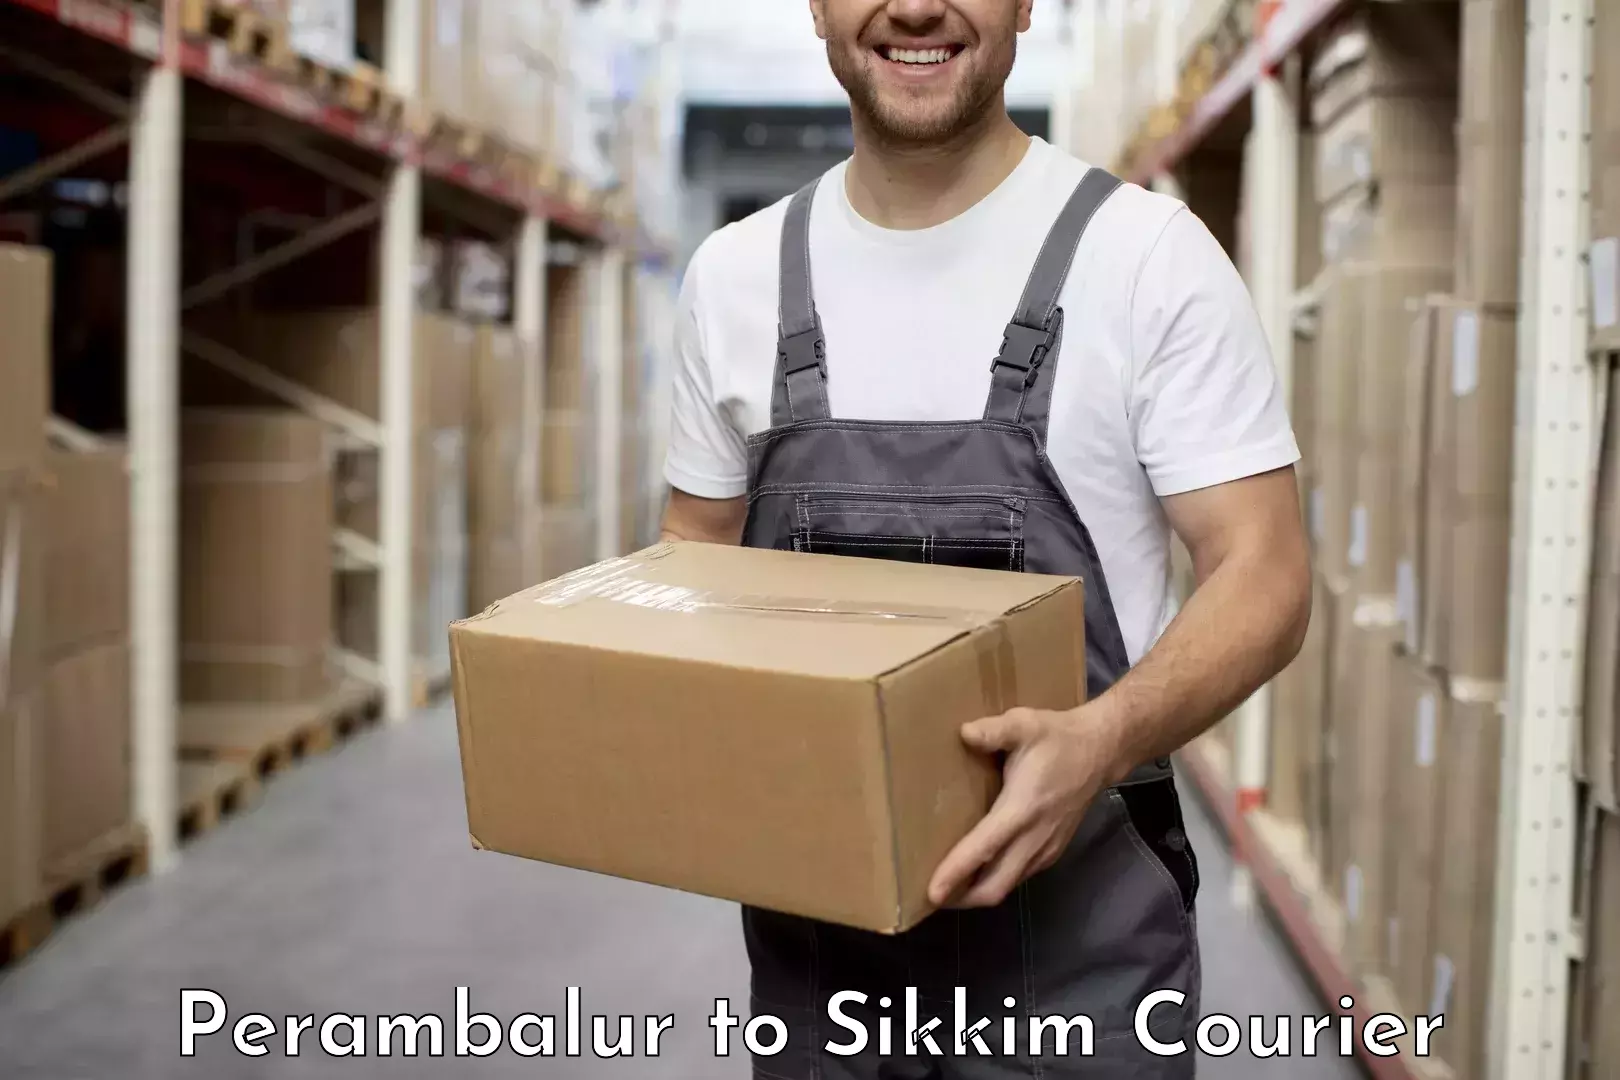 On-demand courier Perambalur to East Sikkim